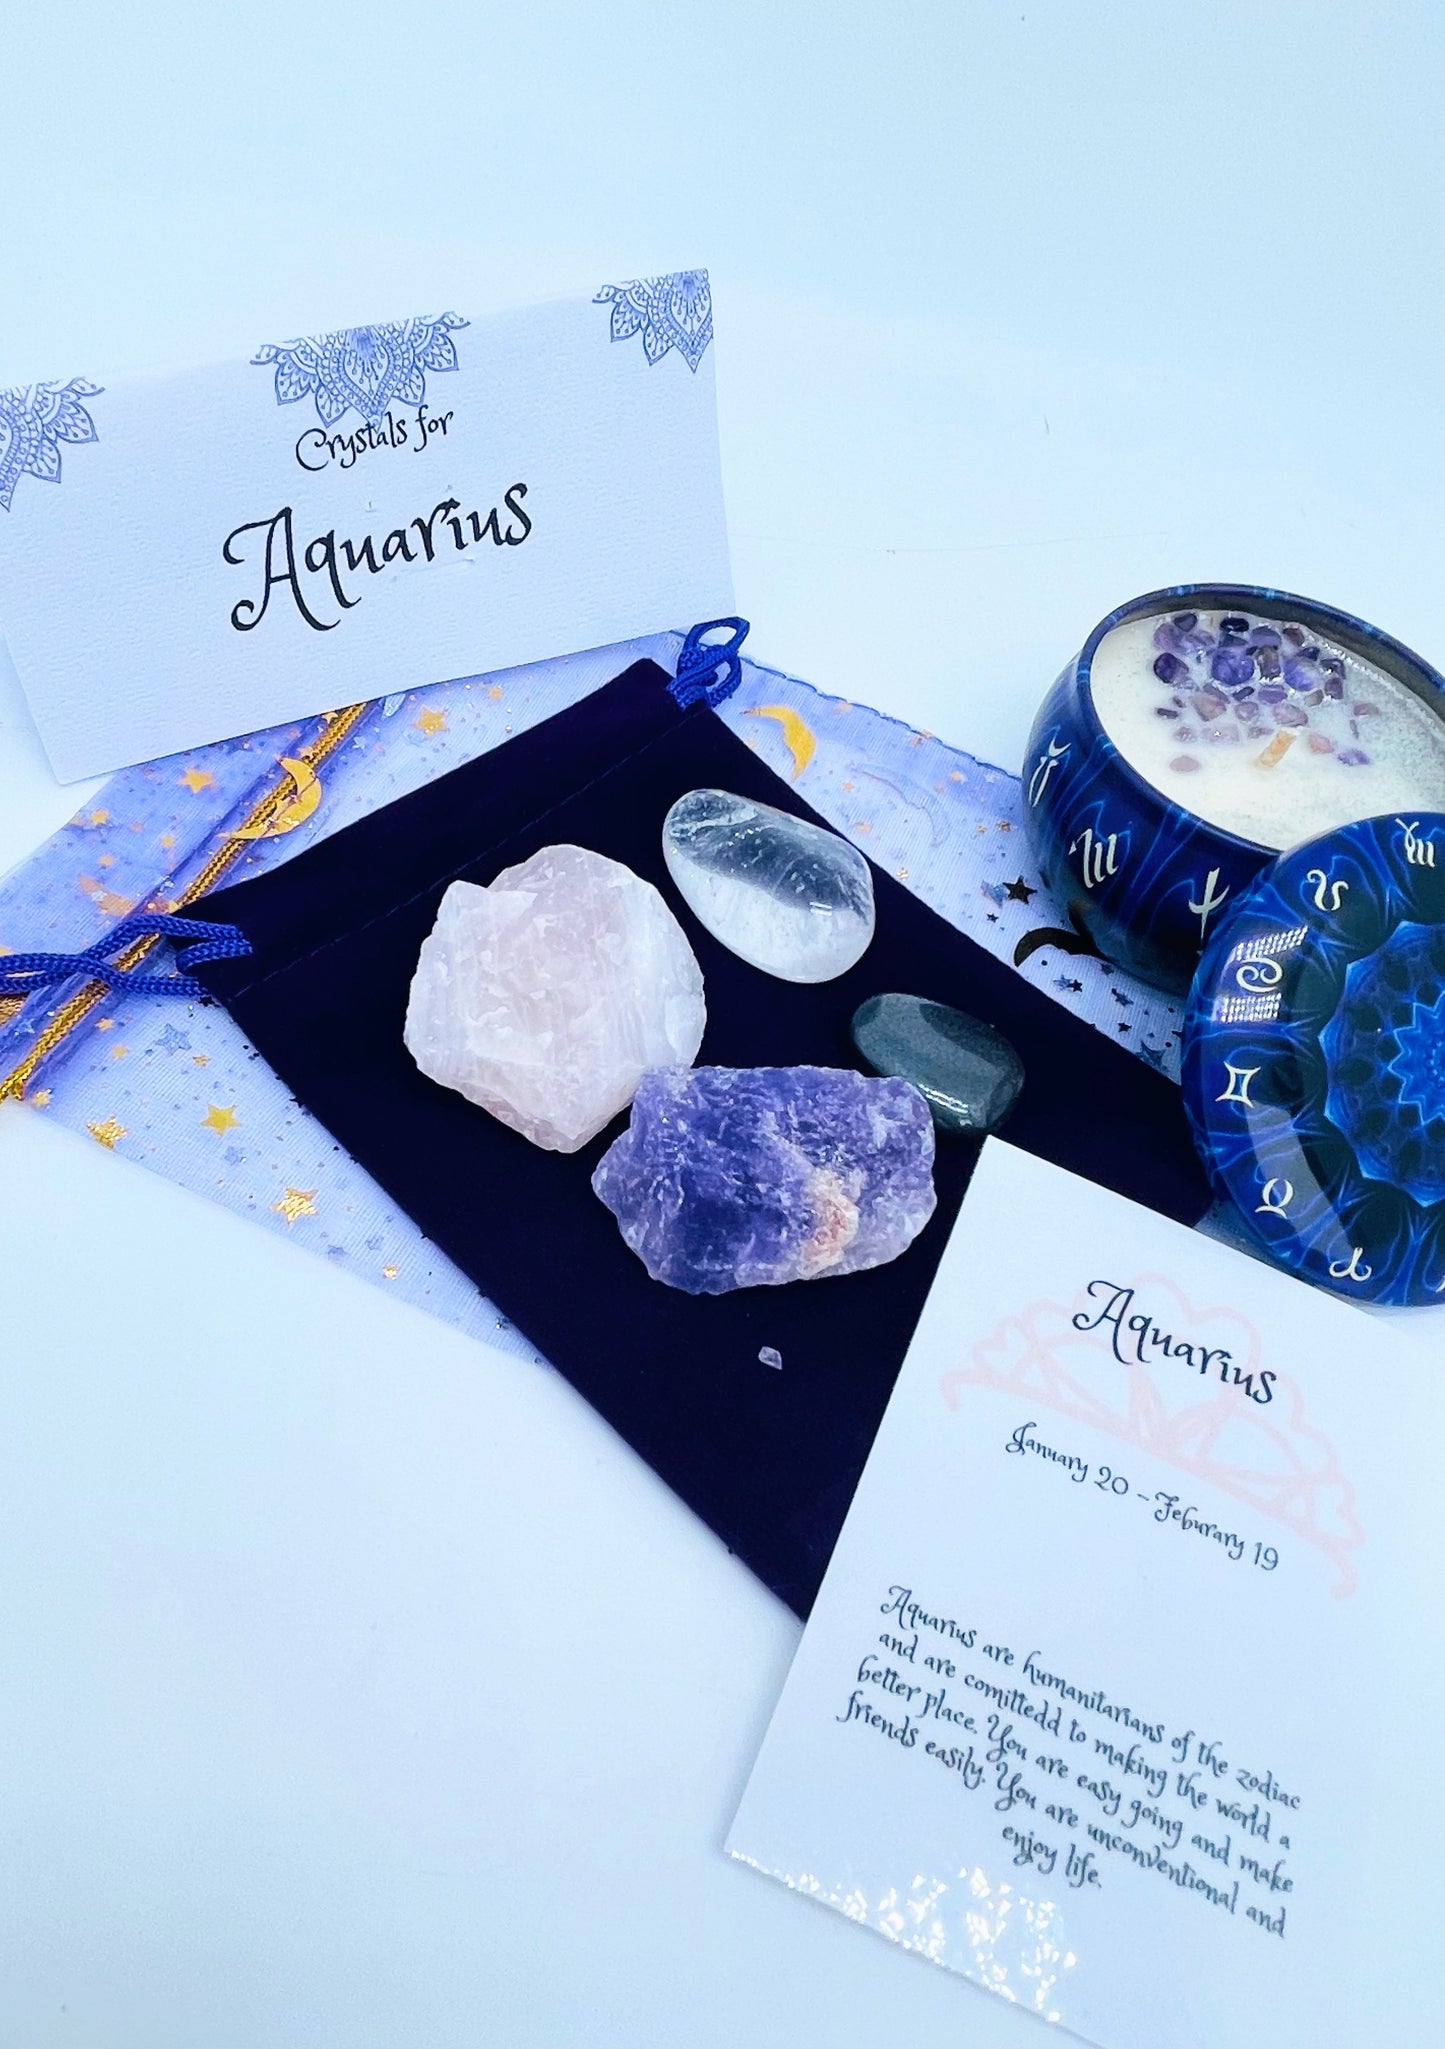 Aquarius zodiac candle gift set with candle and four crystals for this sign sitting on a velvet bag.